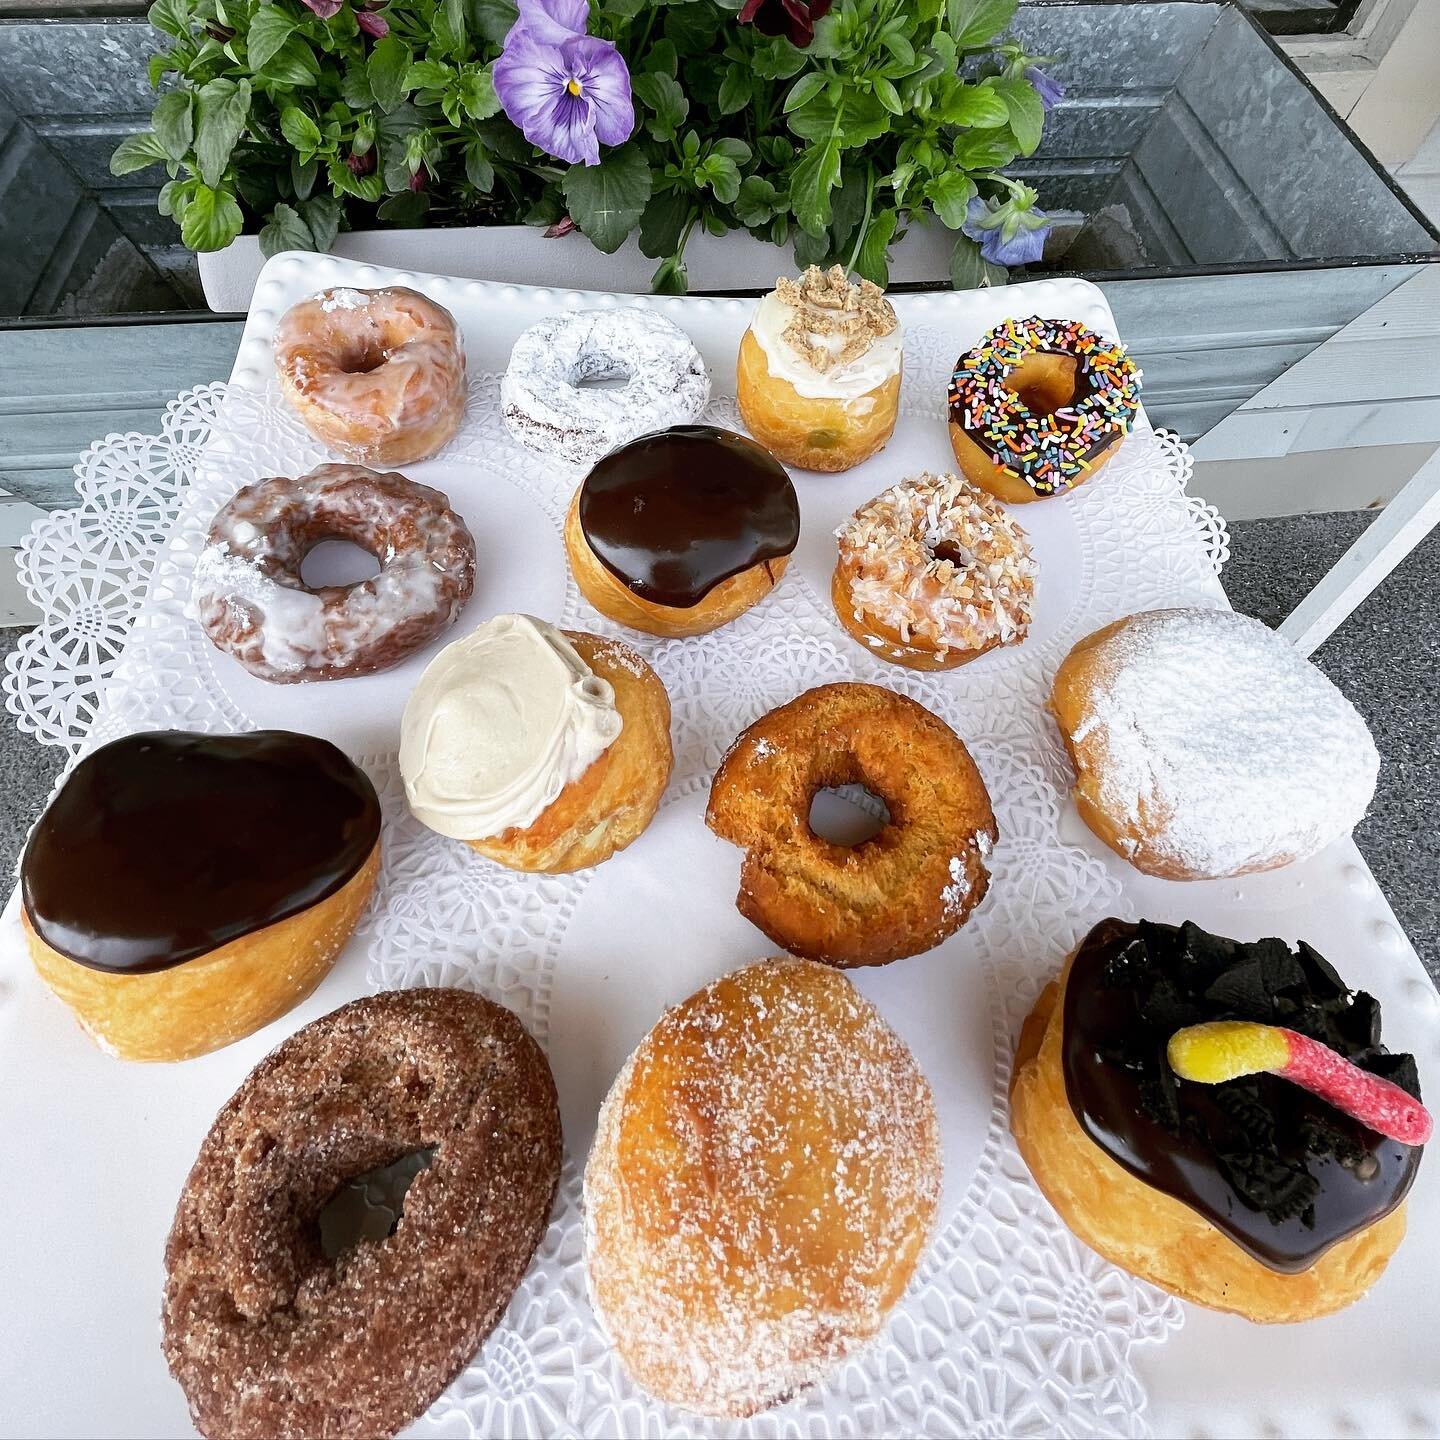 A selection of our delightful mini donuts is the perfect Mother&rsquo;s Day gift. Call ahead and we can put together a box of her favorite flavors for you. We are open on Mother&rsquo;s Day until 2pm.